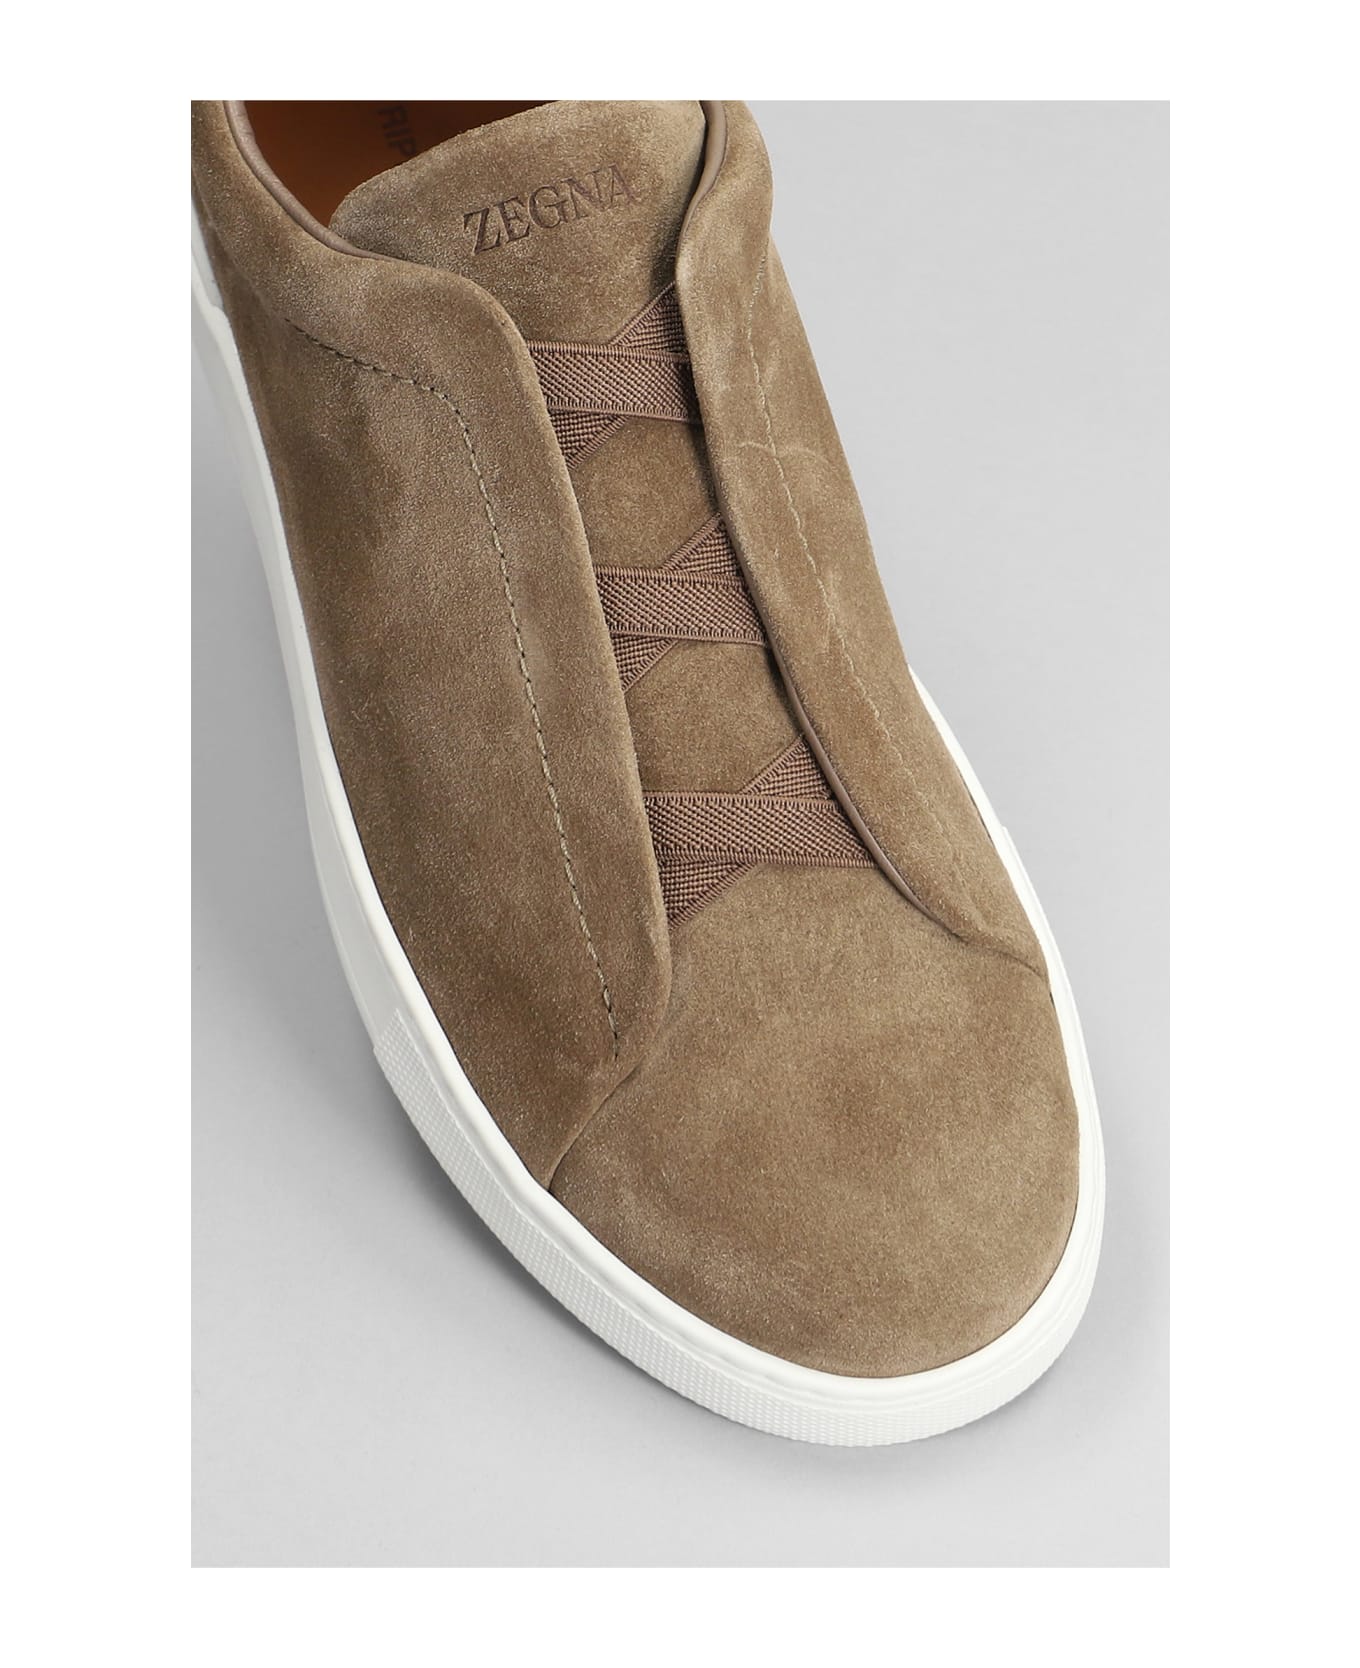 Zegna Triple Stich Sneakers In Camel Suede - Camel スニーカー